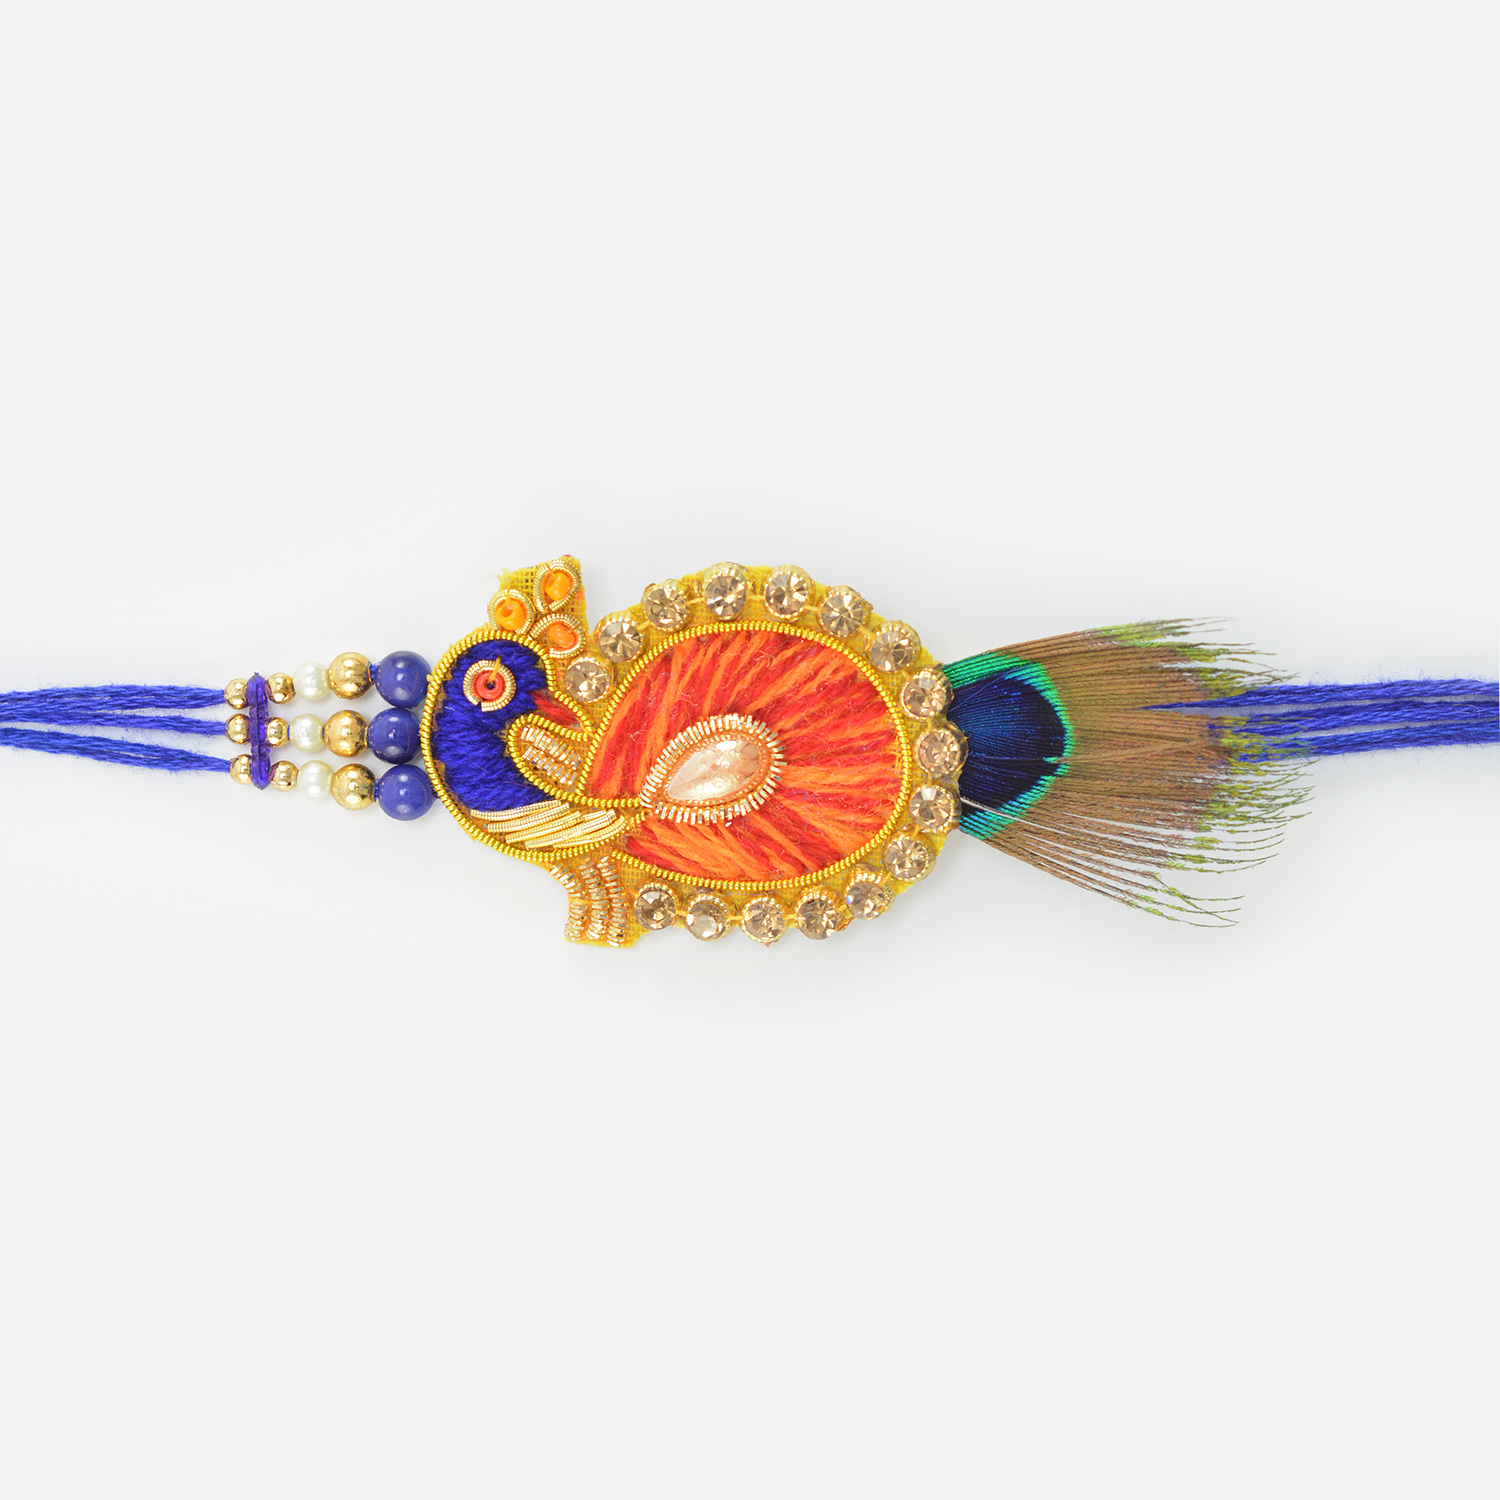 Peacock on Blue Thread and Beads Marvelous Looking Design er Rakhi for Brother